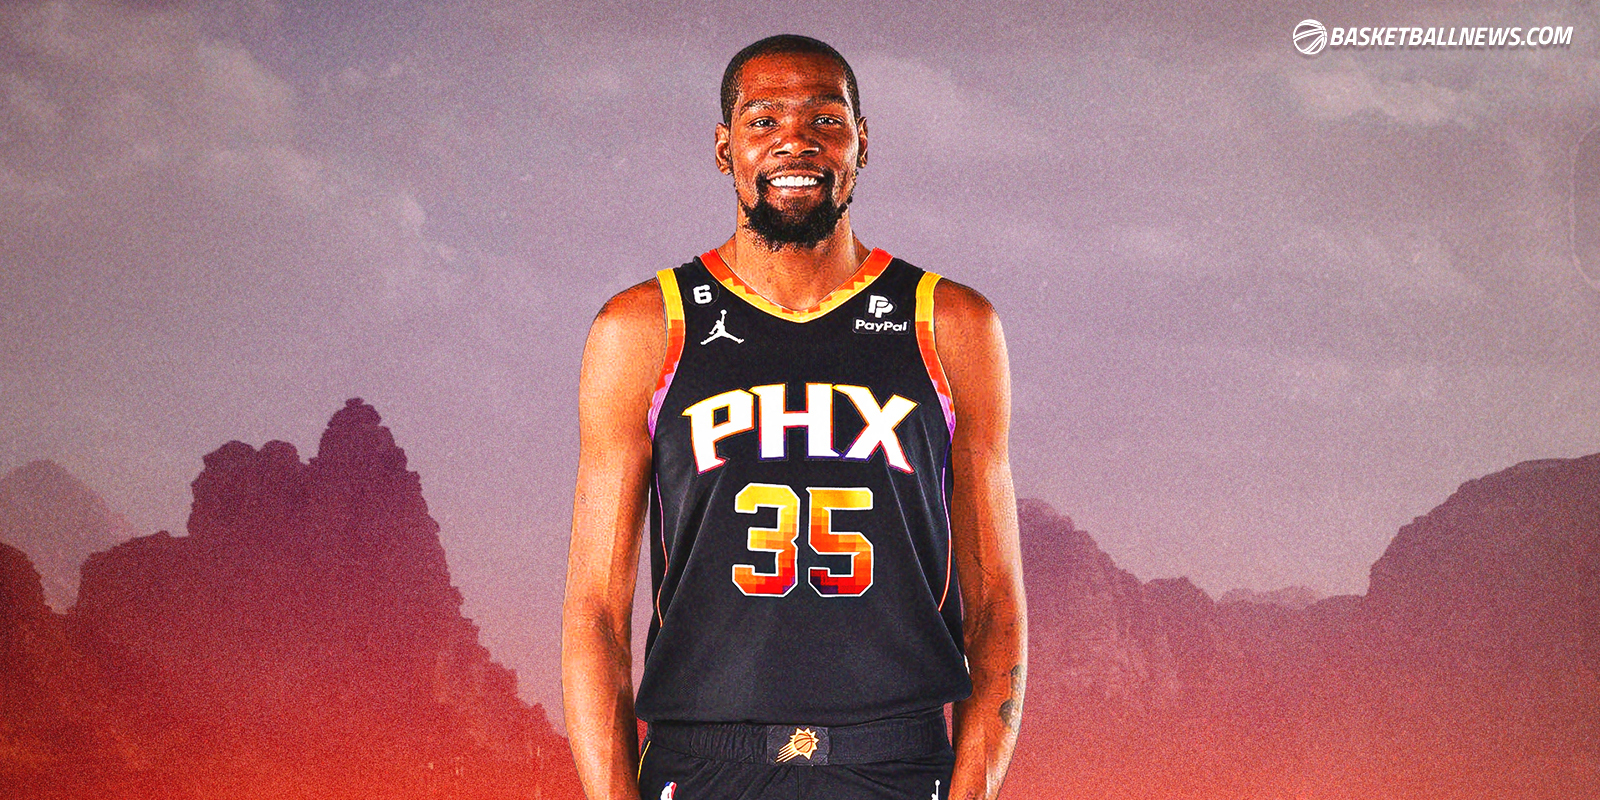 ESPN - Breaking: The Phoenix Suns are nearing a blockbuster trade to  acquire Kevin Durant, sources tell Adrian Wojnarowski. The Suns are sending  Mikal Bridges, Cam Johnson, Jae Crowder, four first-round picks